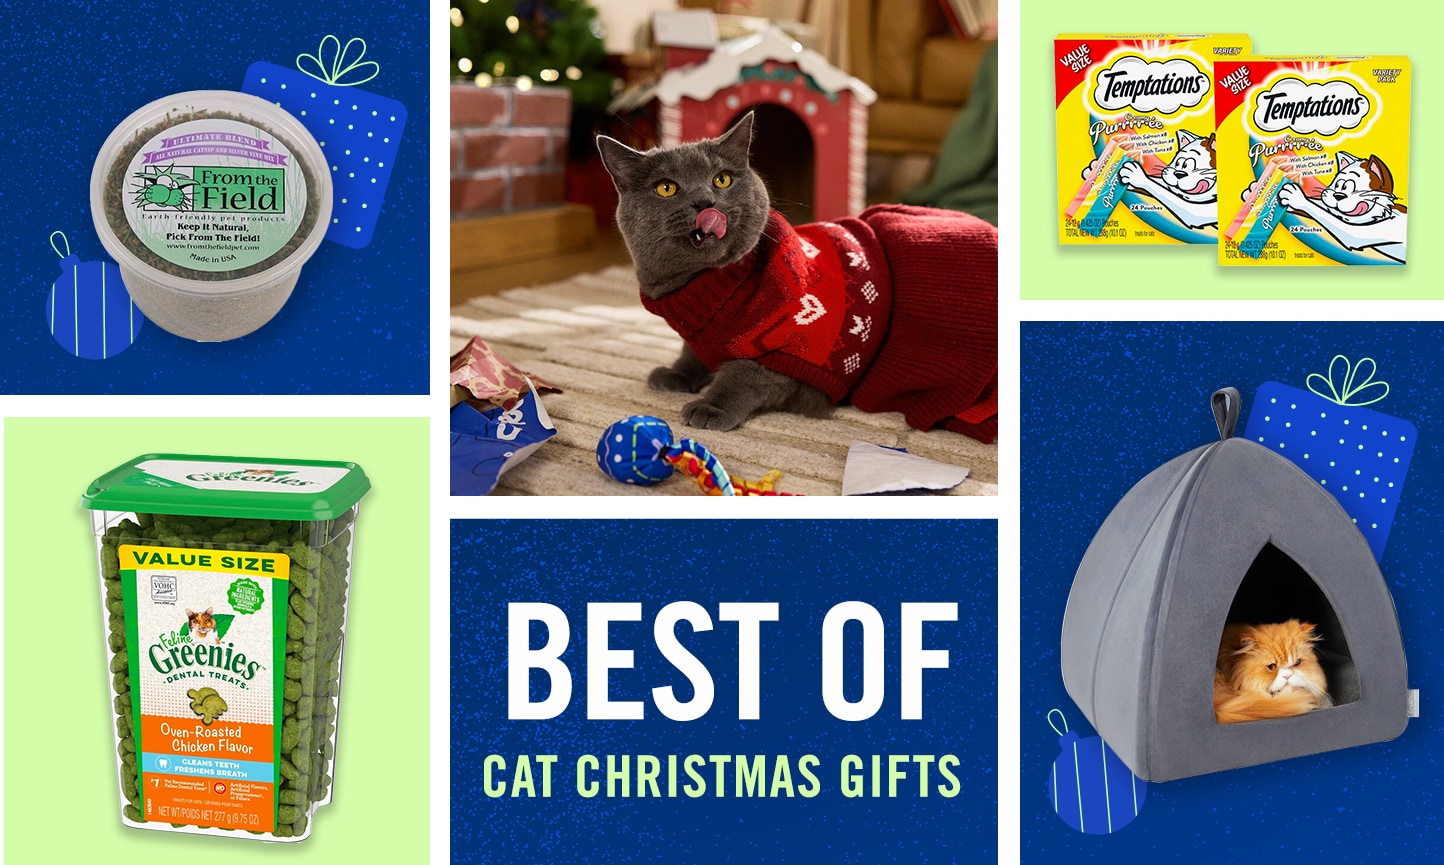 Ultimate Christmas Gift Guide: 10 Christmas Gifts for Your Dog! - Nicole Is